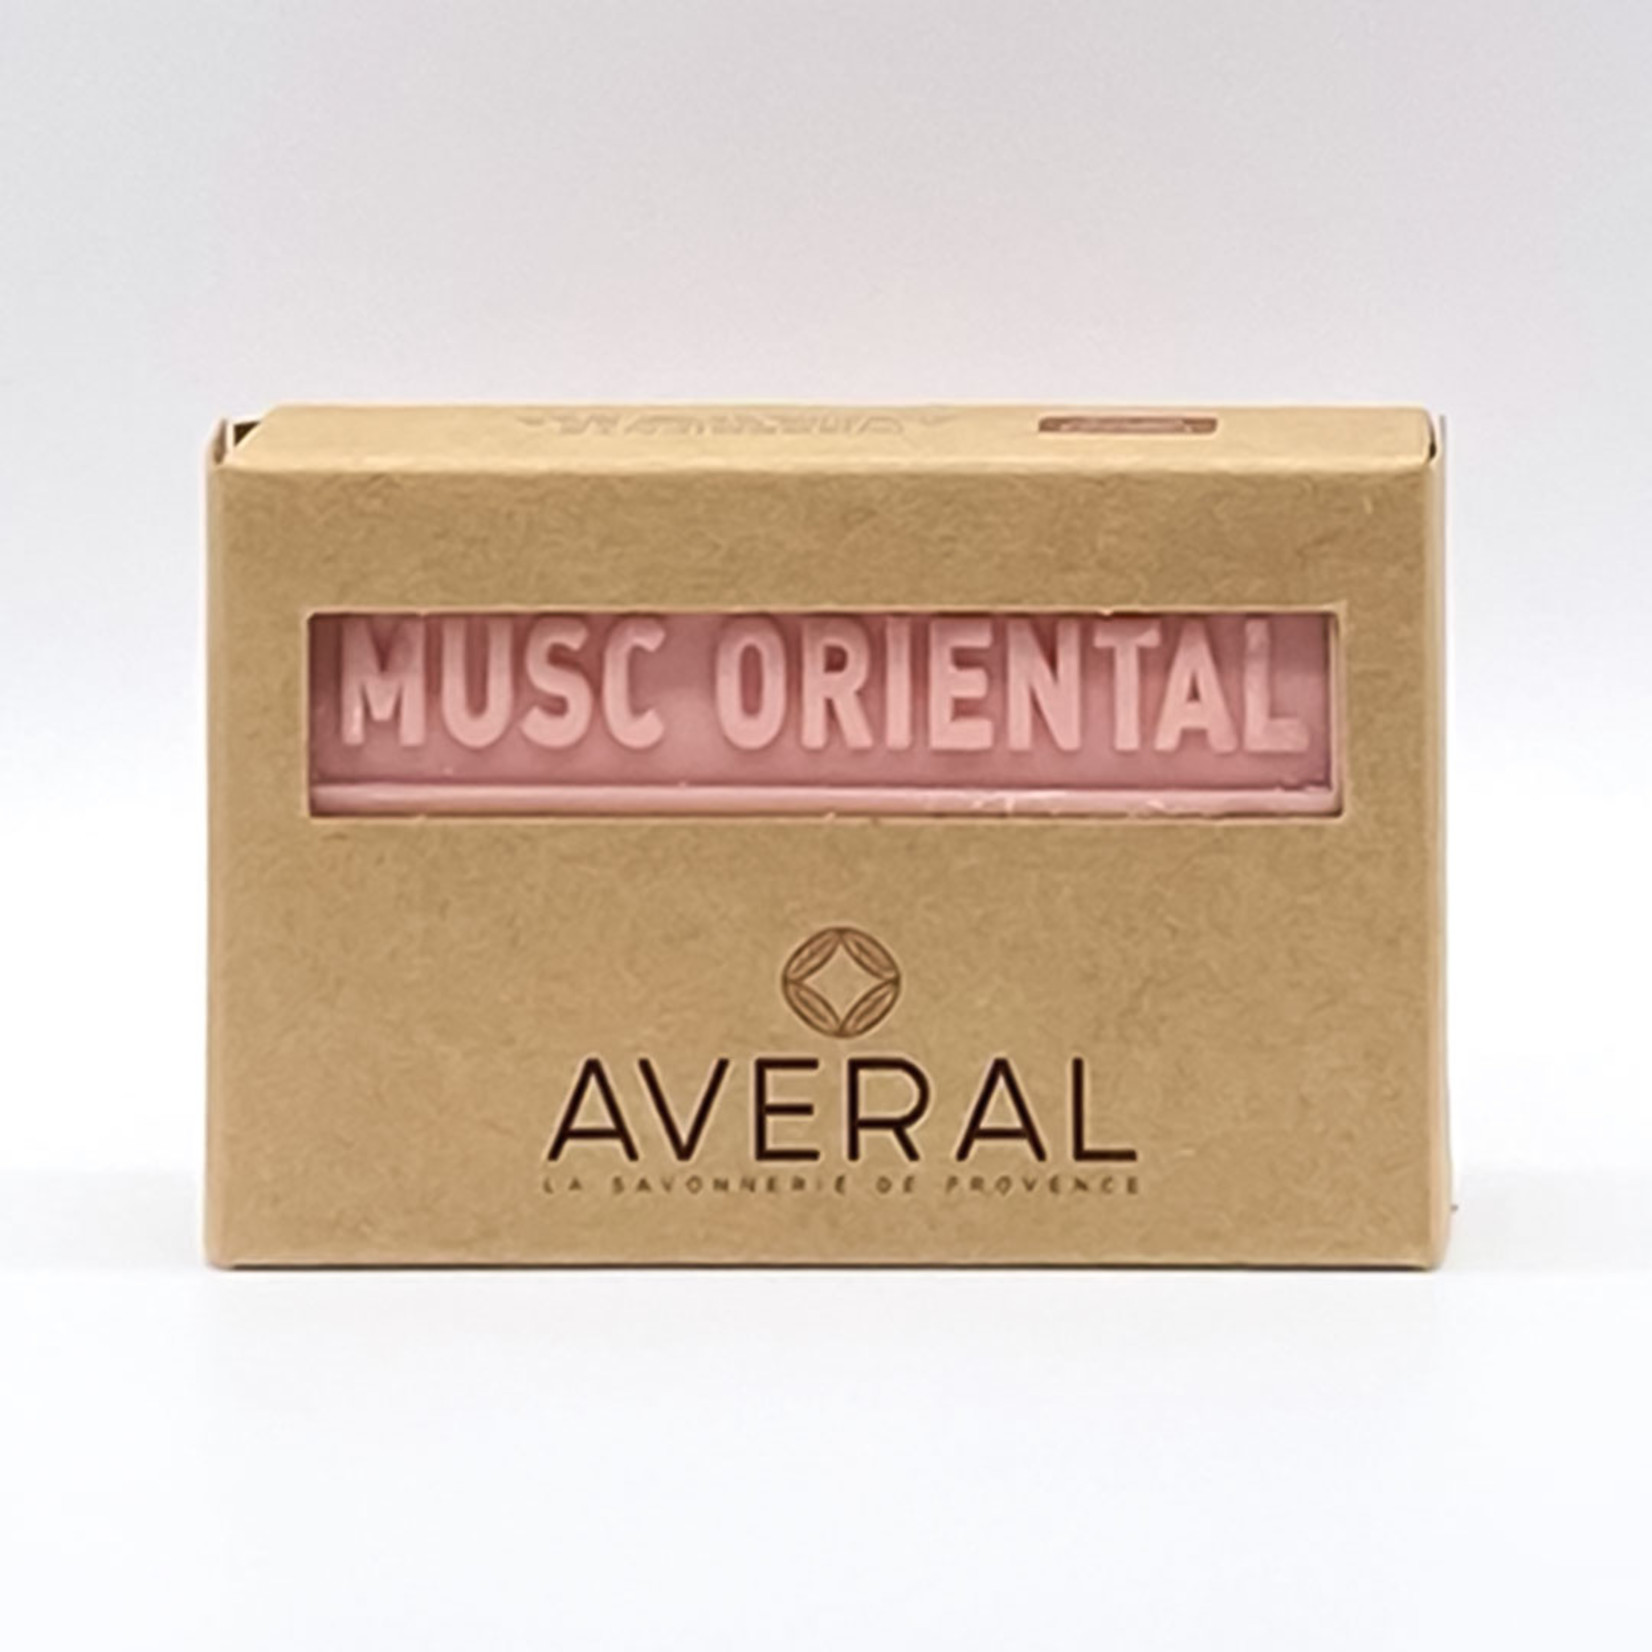 Averal Provence Oriental Musk French Soap